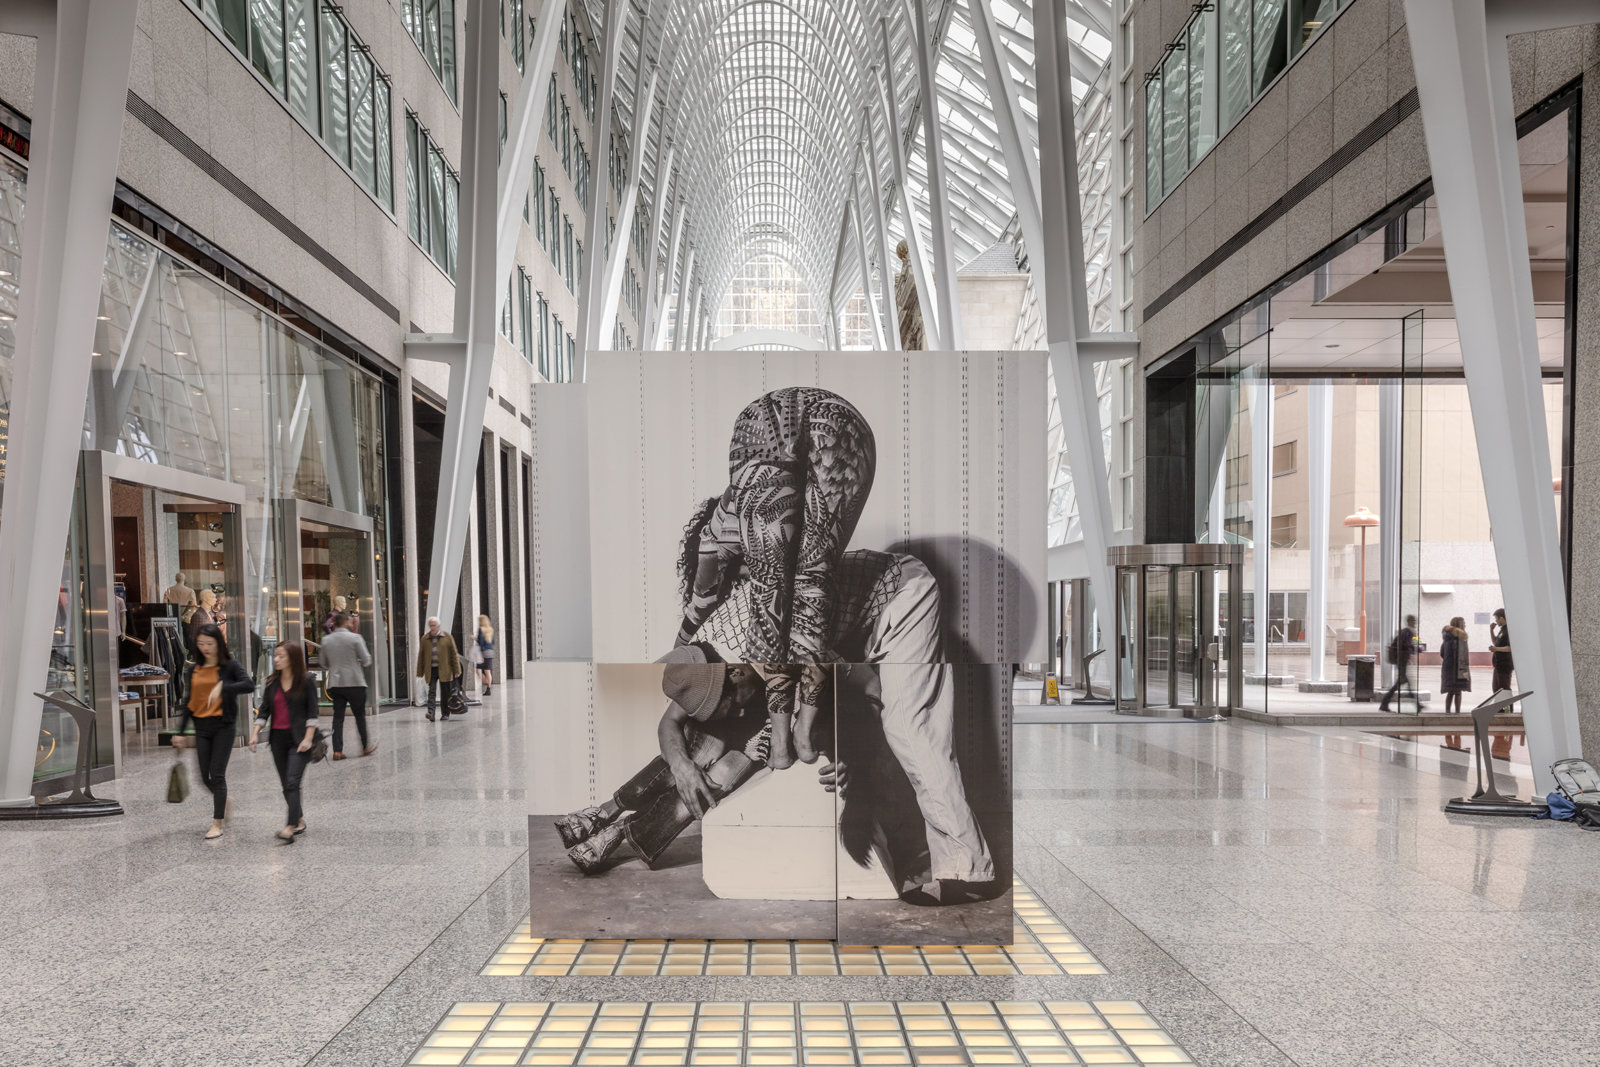 Valérie Blass, Bleached Jeans from Nous ne somme pas des héros, 2017, mixed media, dimensions variable. Installation view, Brookfield Place, Toronto, ON, 2017